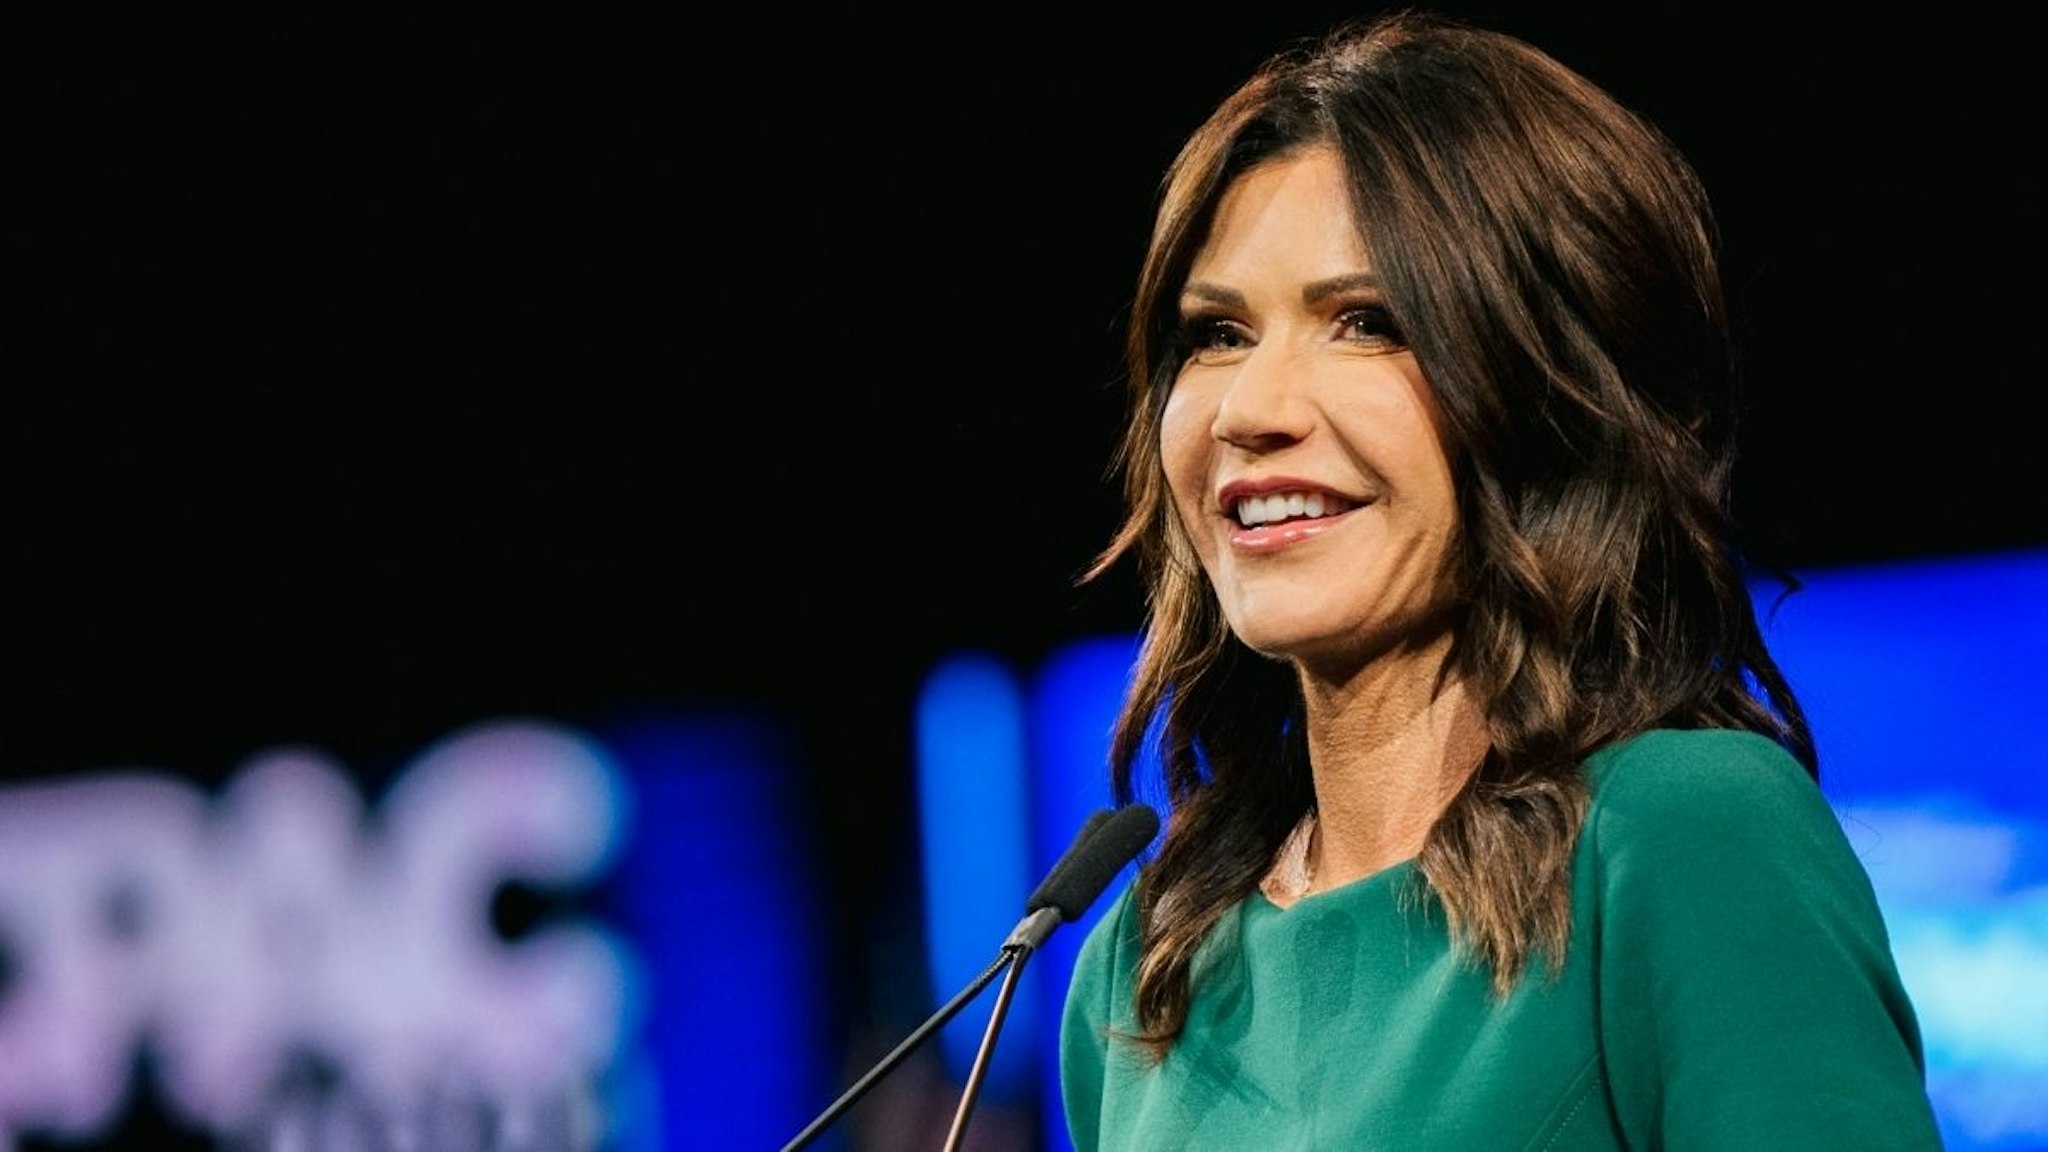 South Dakota Gov. Kristi Noem speaks during the Conservative Political Action Conference CPAC held at the Hilton Anatole on July 11, 2021 in Dallas, Texas.